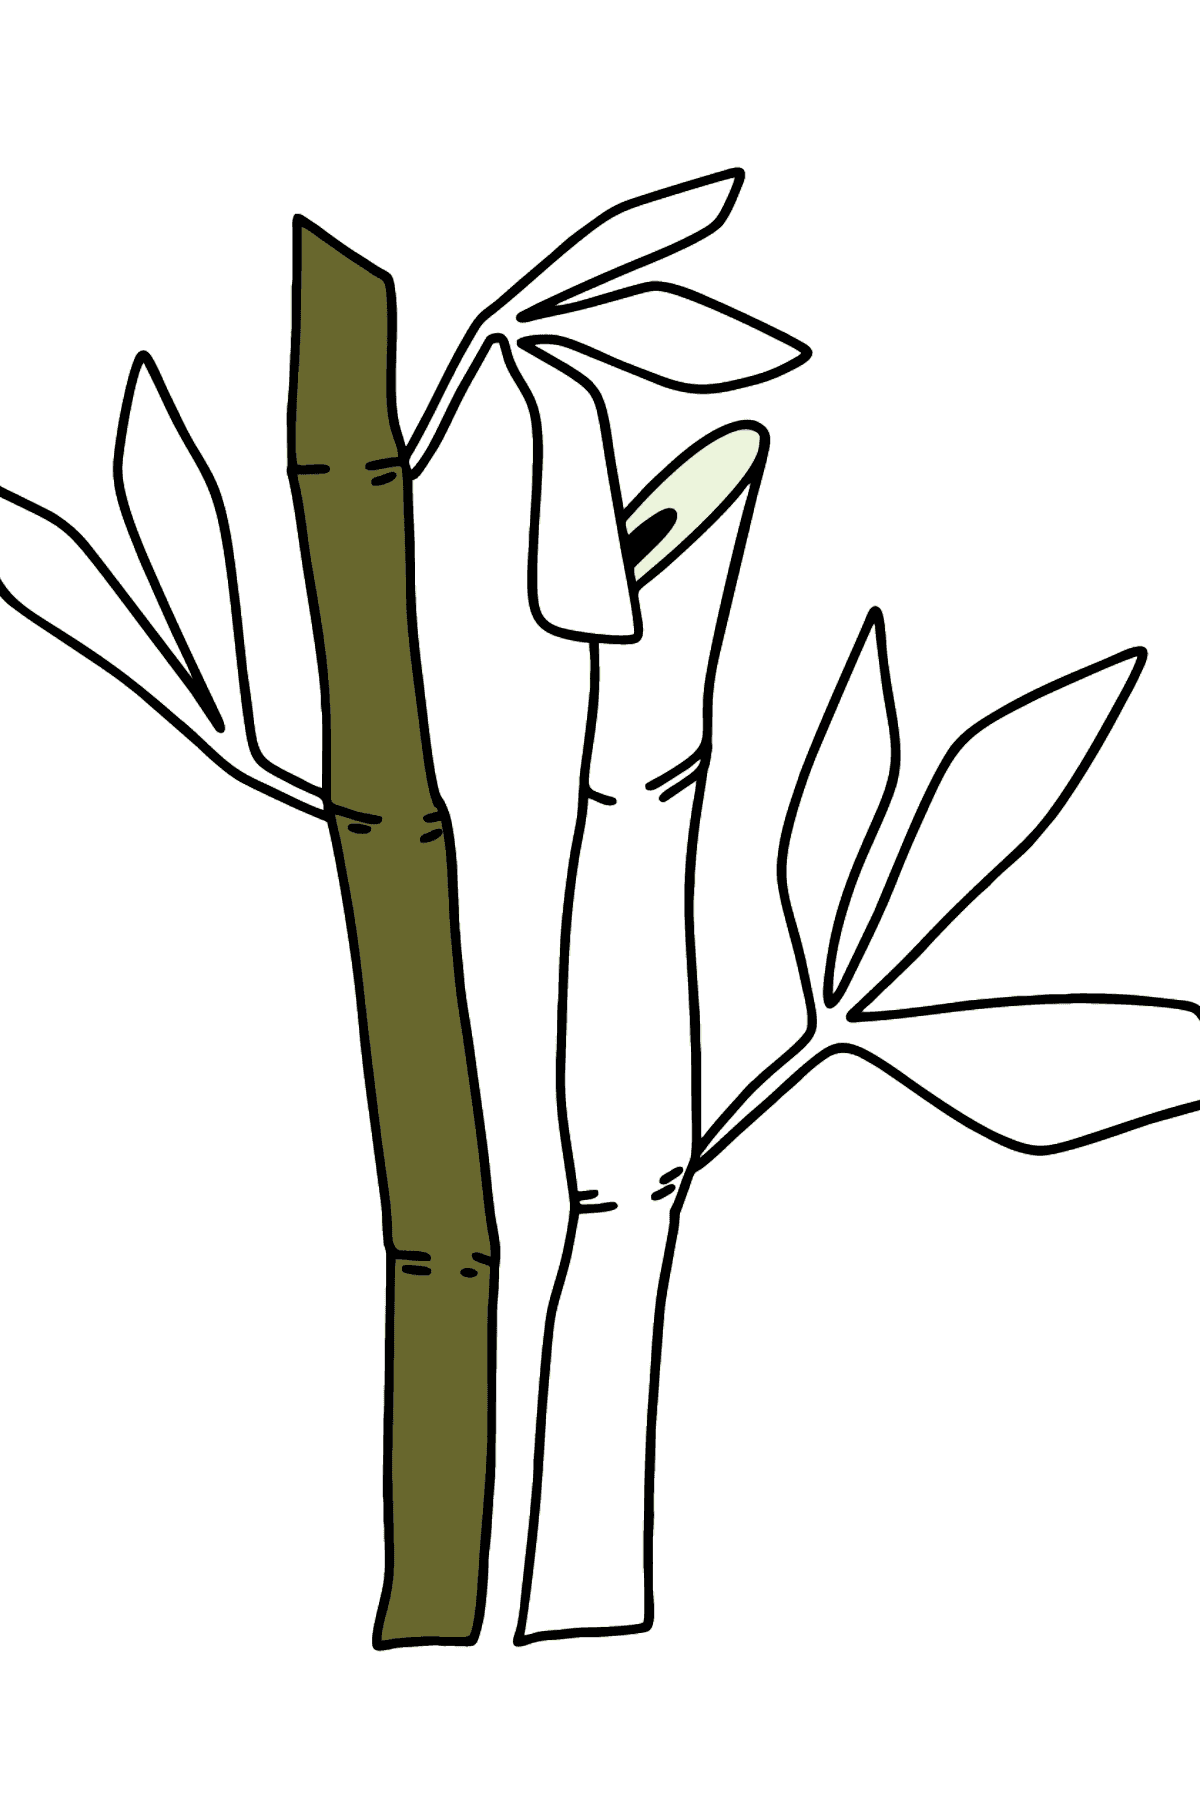 Bamboo coloring page - Coloring Pages for Kids